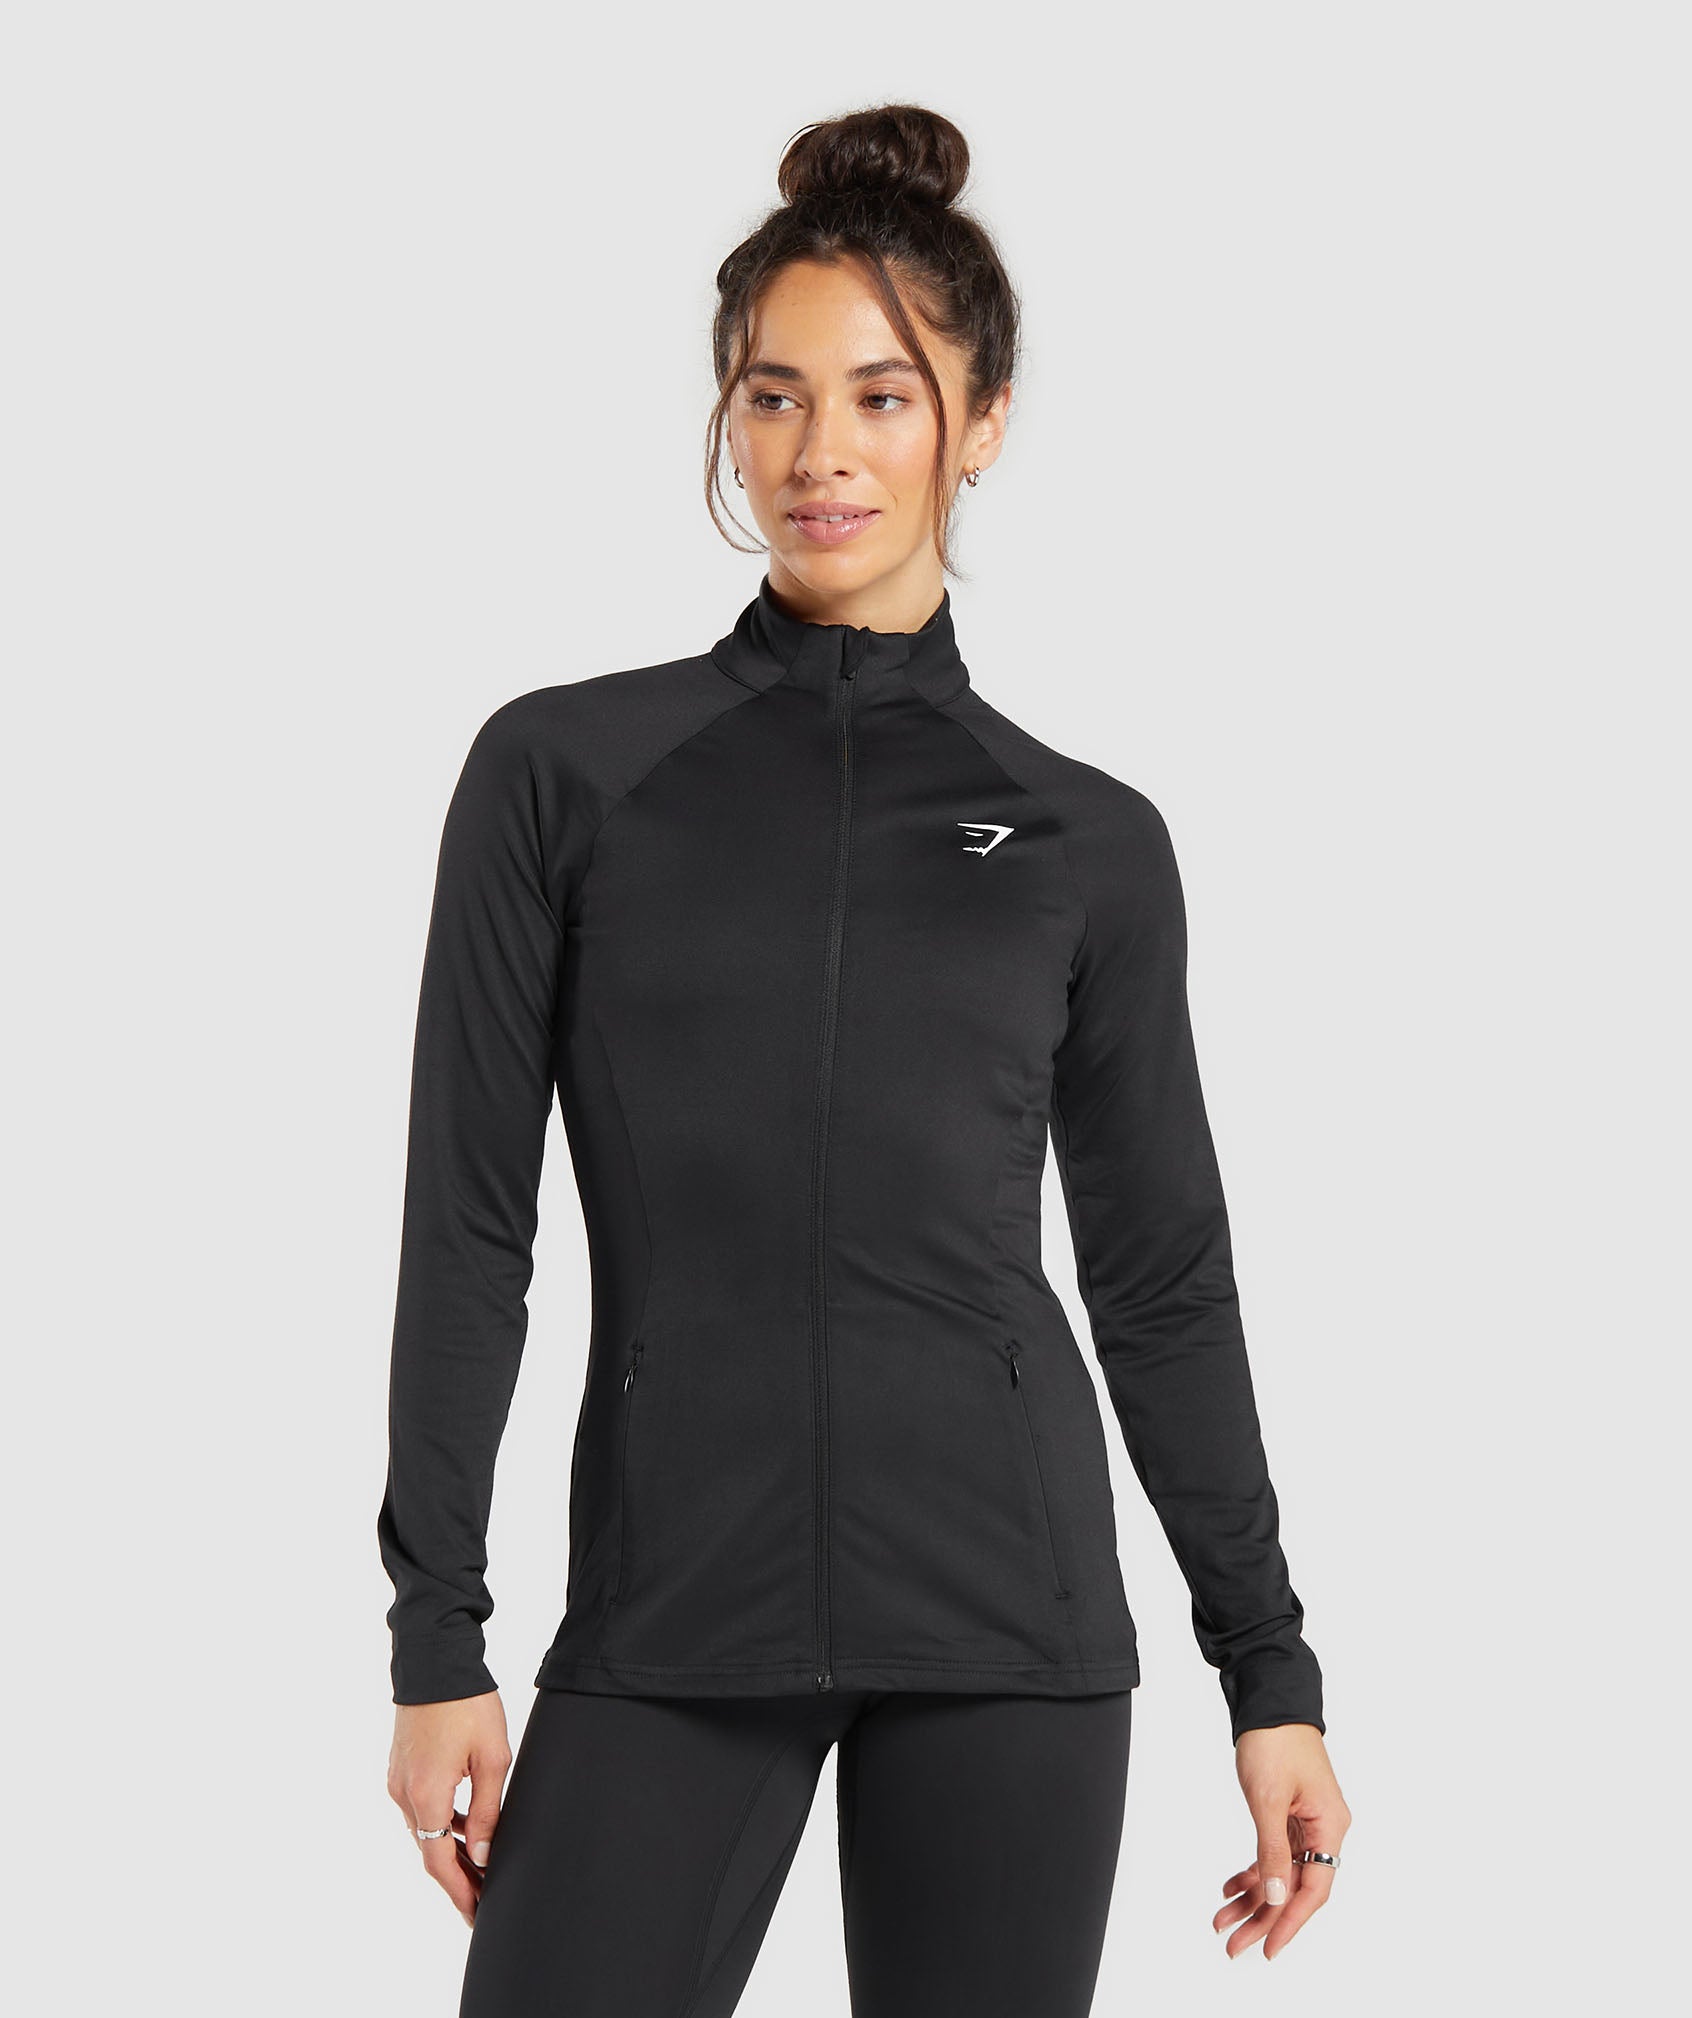 Training Jacket in Black - view 1